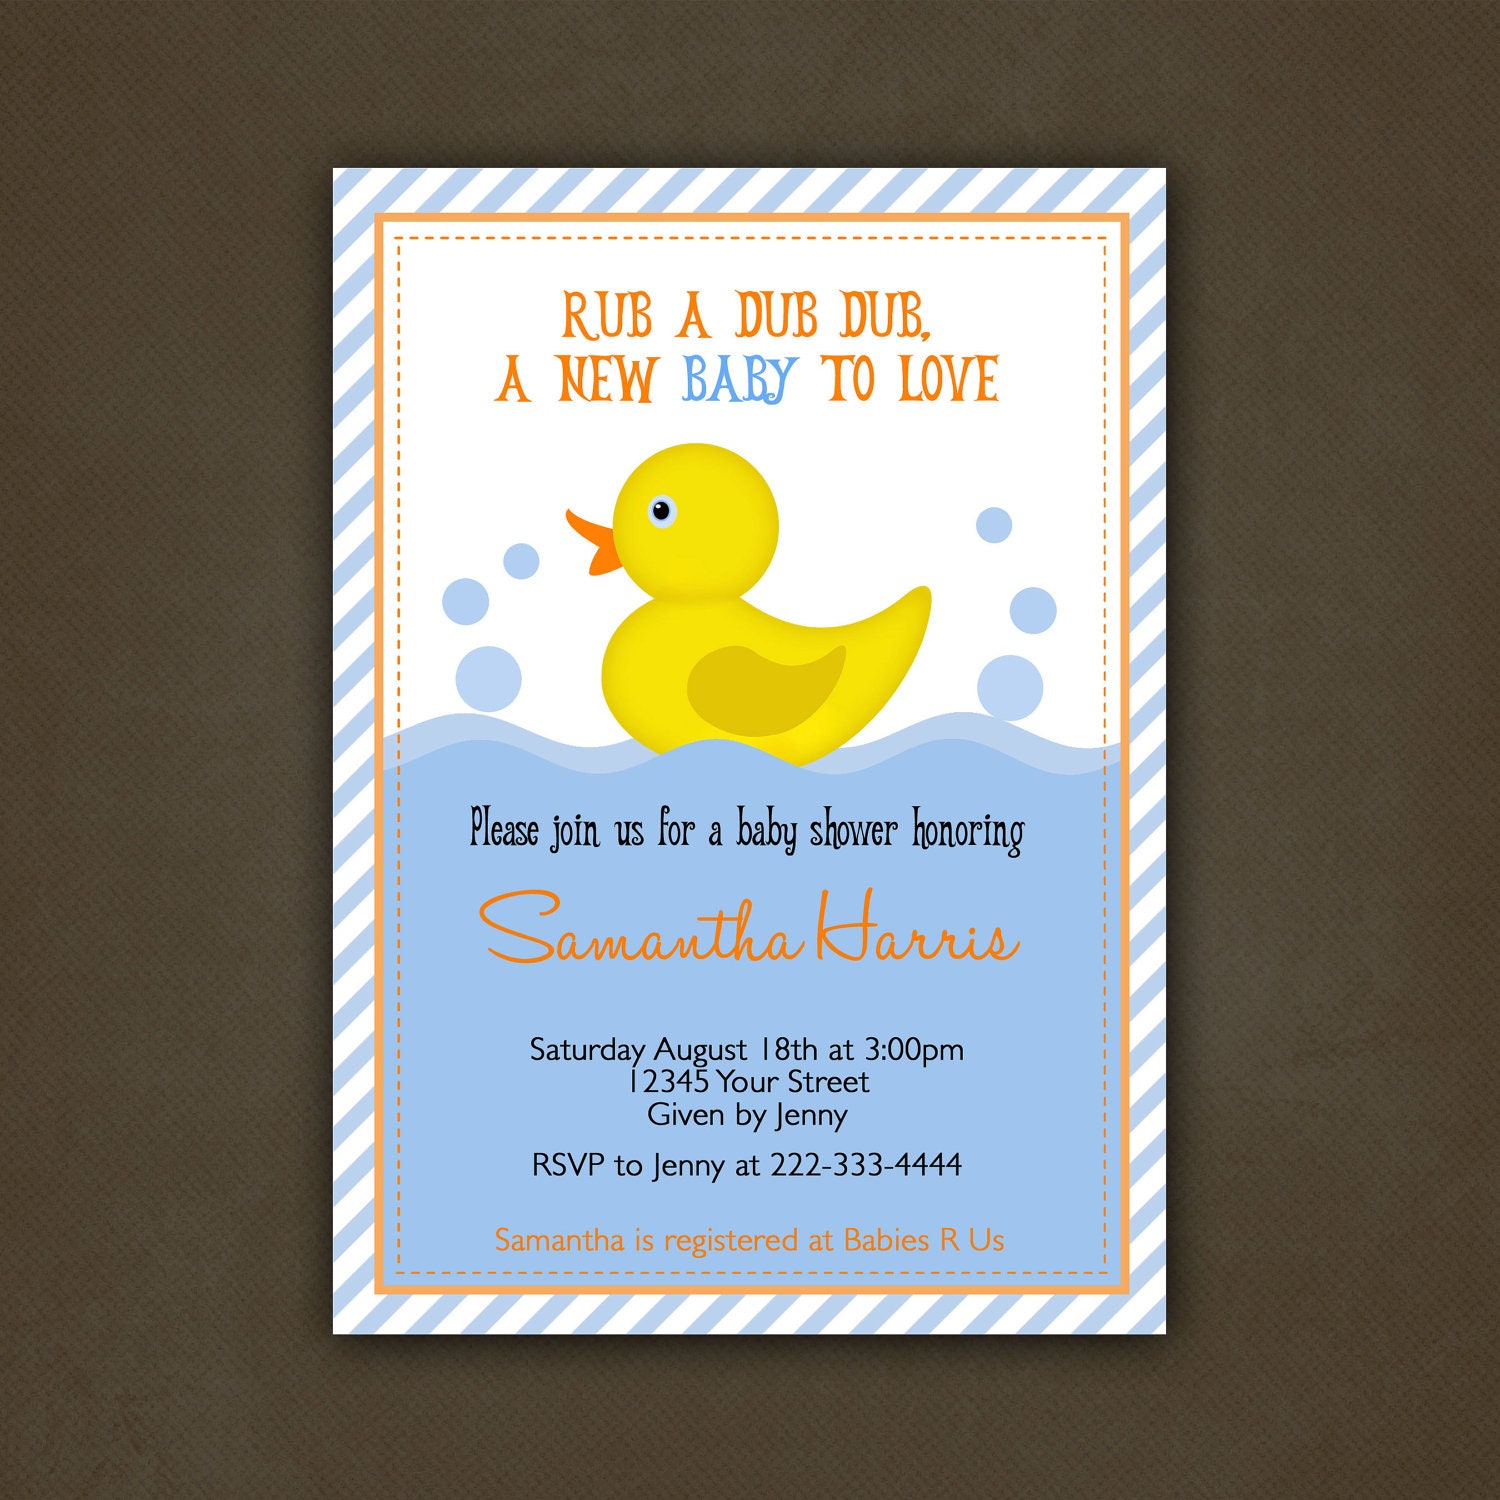 rubber-ducky-baby-shower-invitation-printable-by-pinkskyprintables